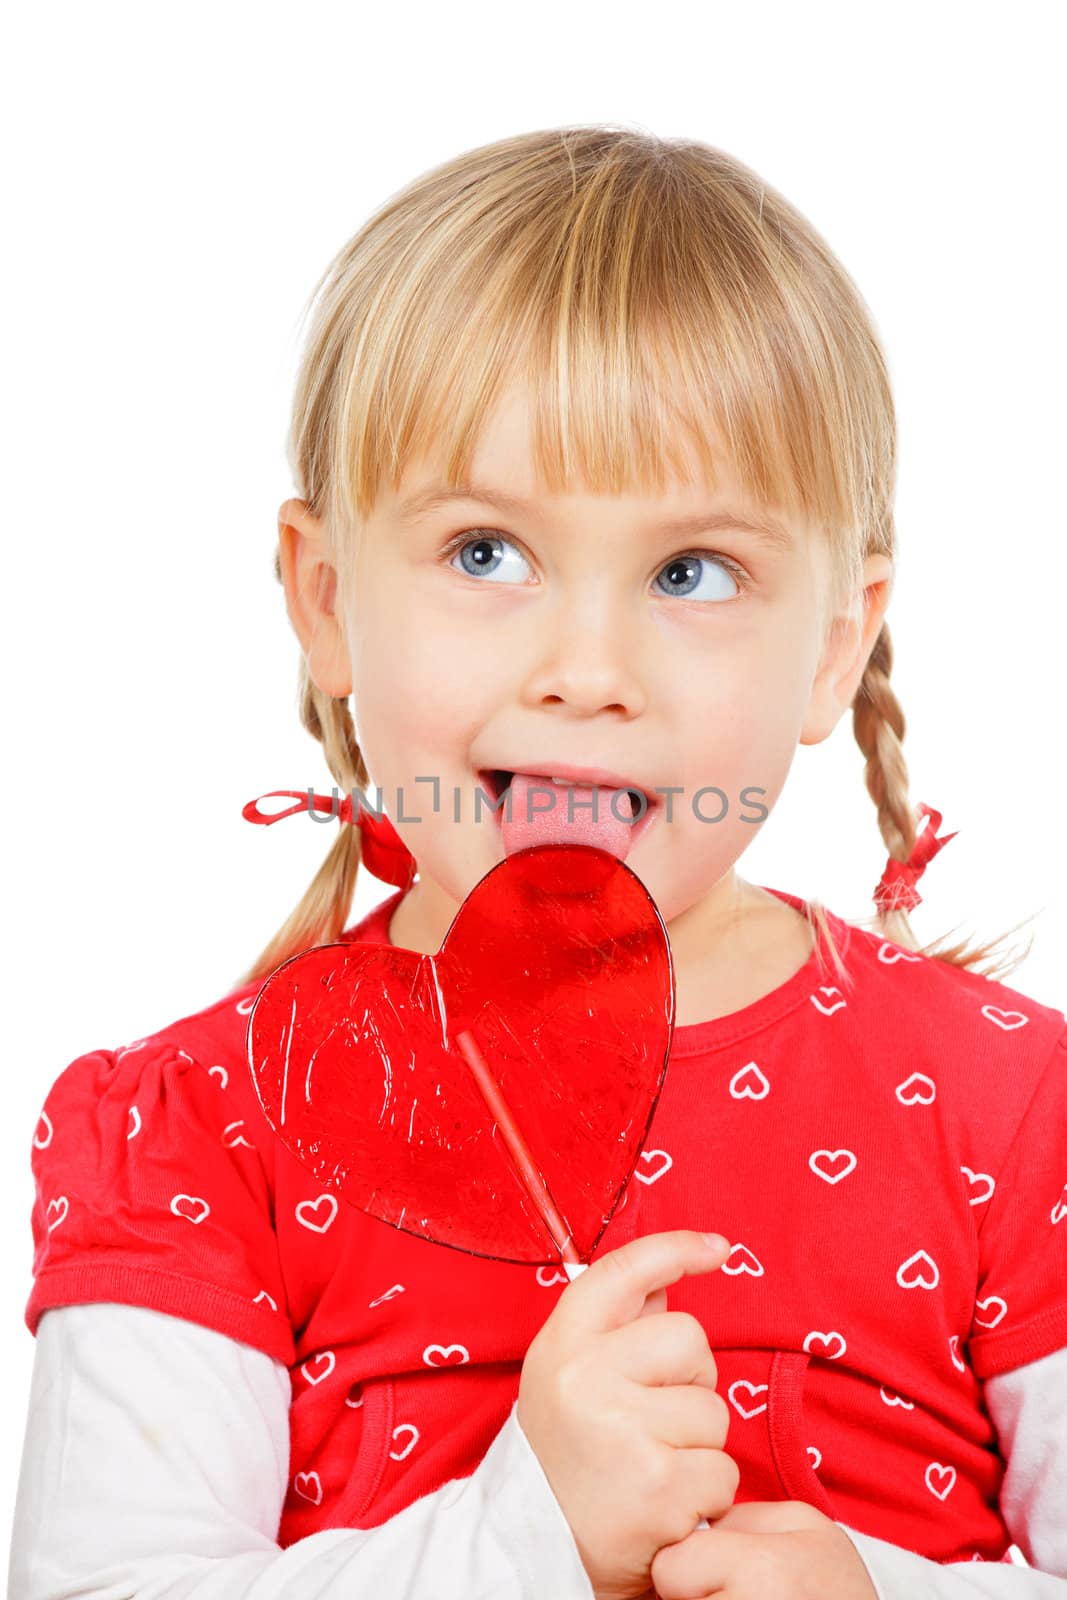 Cute little girl licking big red heart shaped lolly pop candy